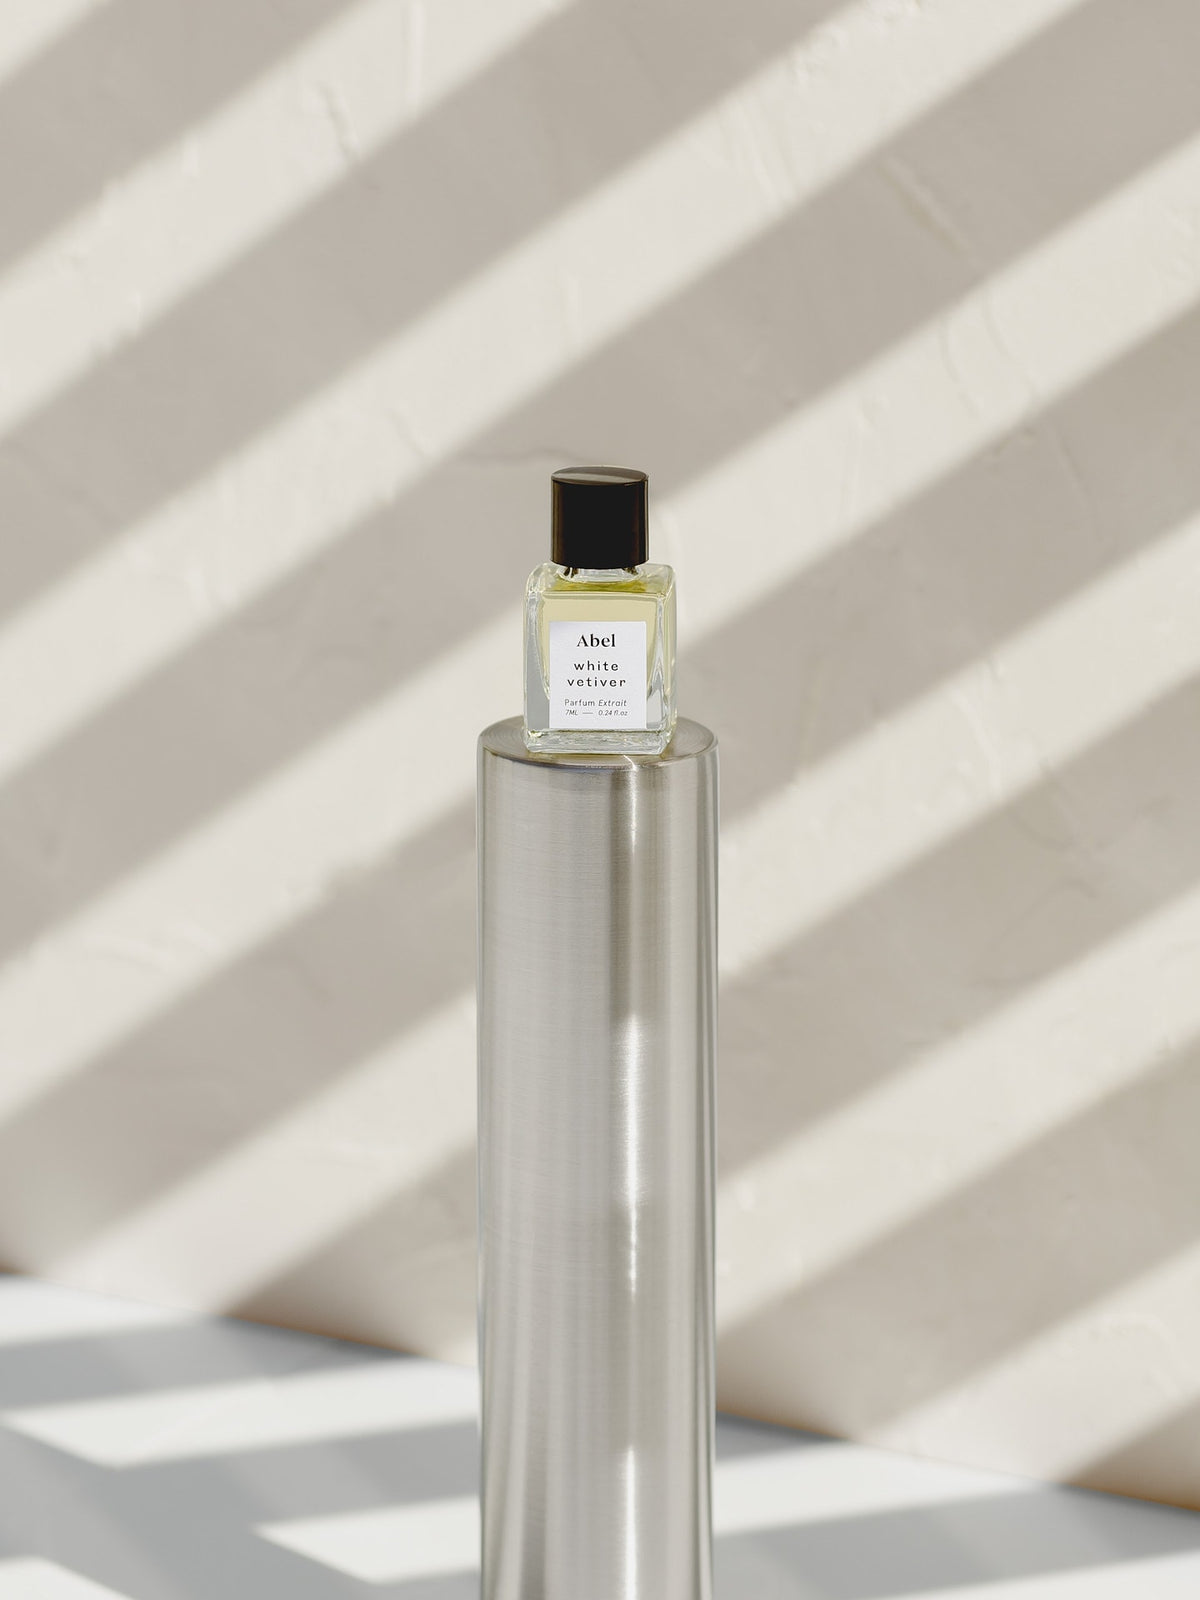 An Abel White Vetiver Parfum Extrait – for energy, an alcohol-free bottle of therapeutic-grade essential oils used for scent rituals, sitting on top of a table.